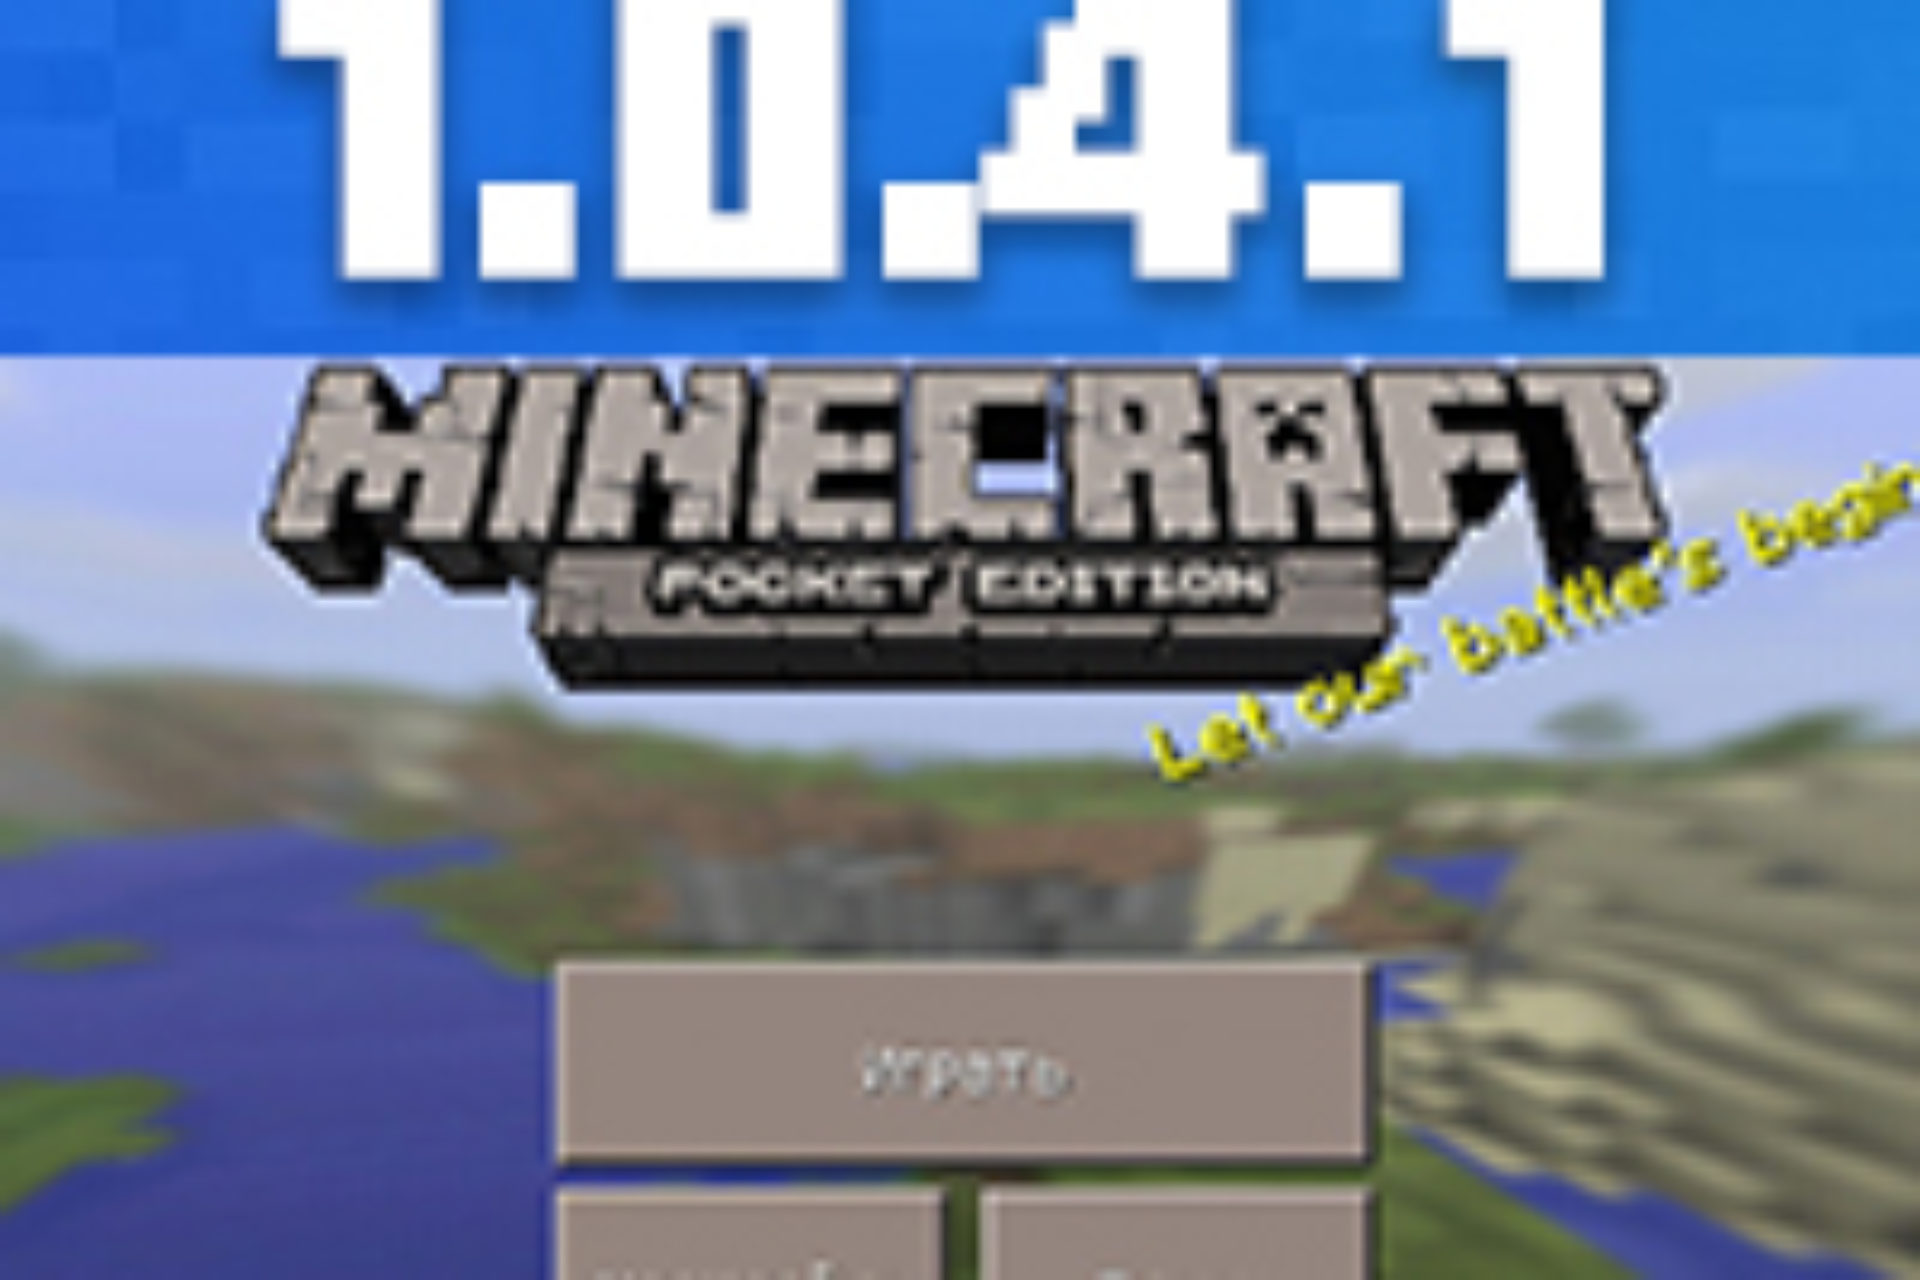 Download Minecraft 1.0.2 Free for Android: Full Version Minecraft PE 1.0.2